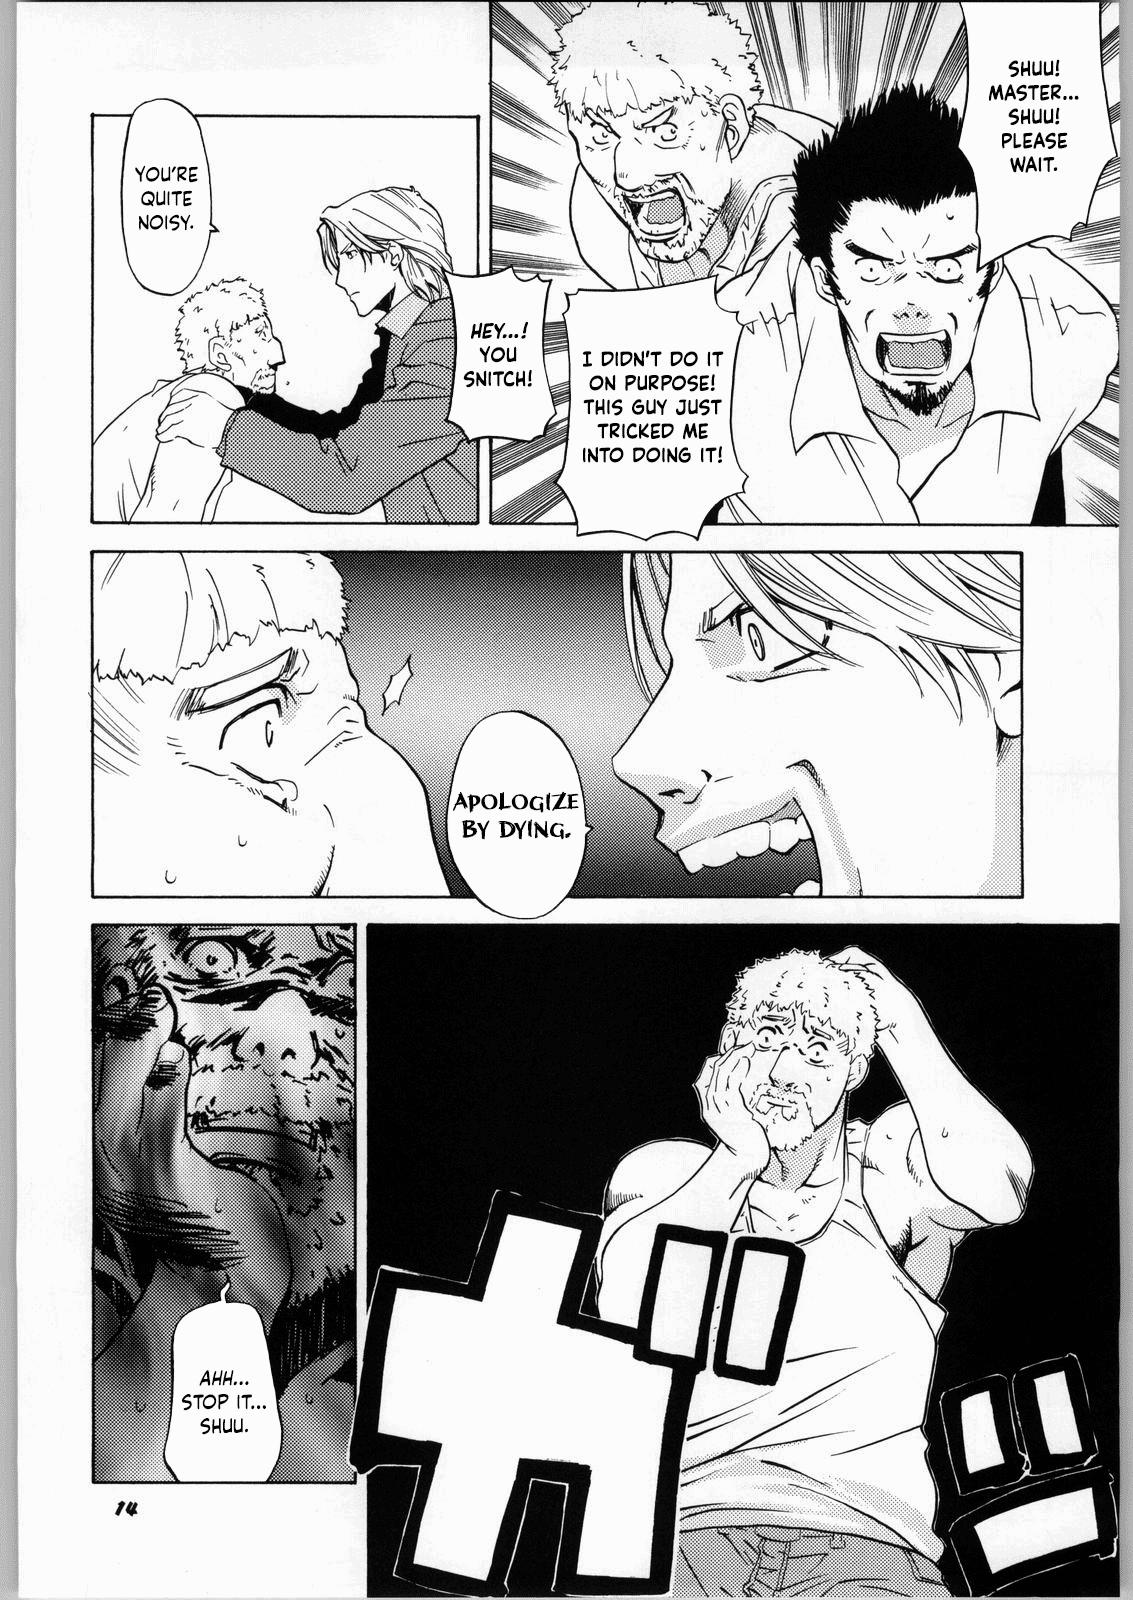 Teenage Girl Porn Tenimuhou No.6 - Another Story of Notedwork Street Fighter - Street fighter Gay College - Page 13